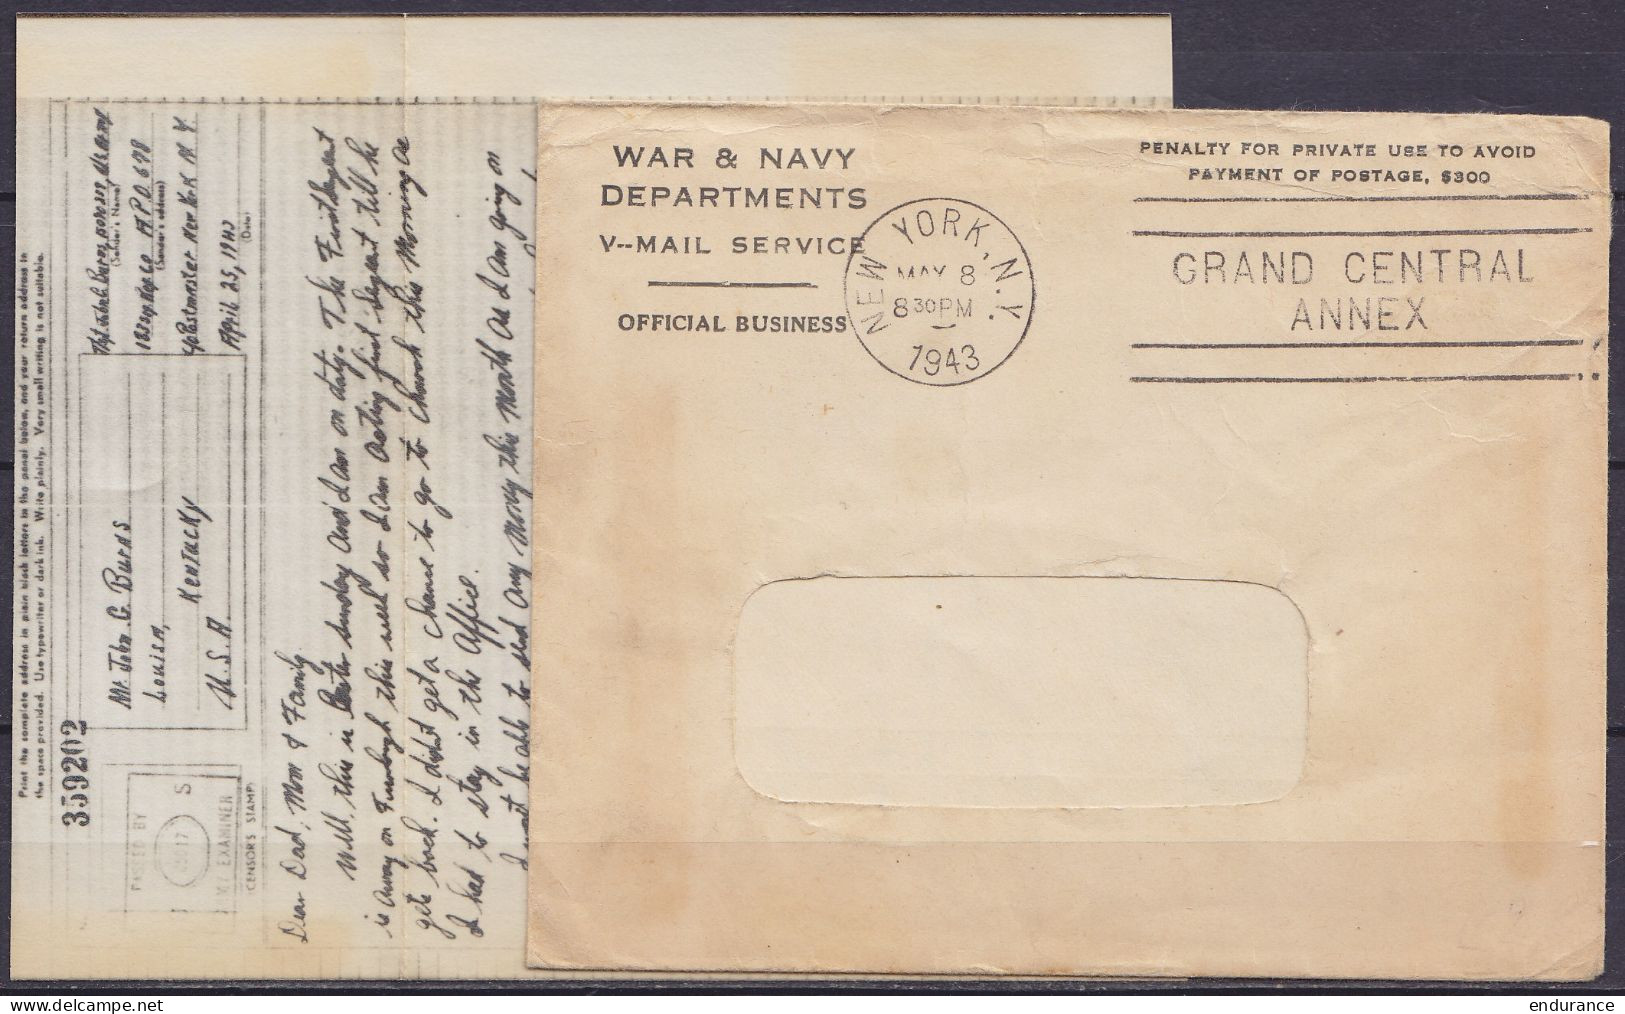 USA - V-MAIL WAR & NAVY DEPARTMENT Flam. "NEW YORK /MAY 8 1943/ GRAND CENTRAL ANNEX" Pour LOUISA Kentucky - Lettres & Documents